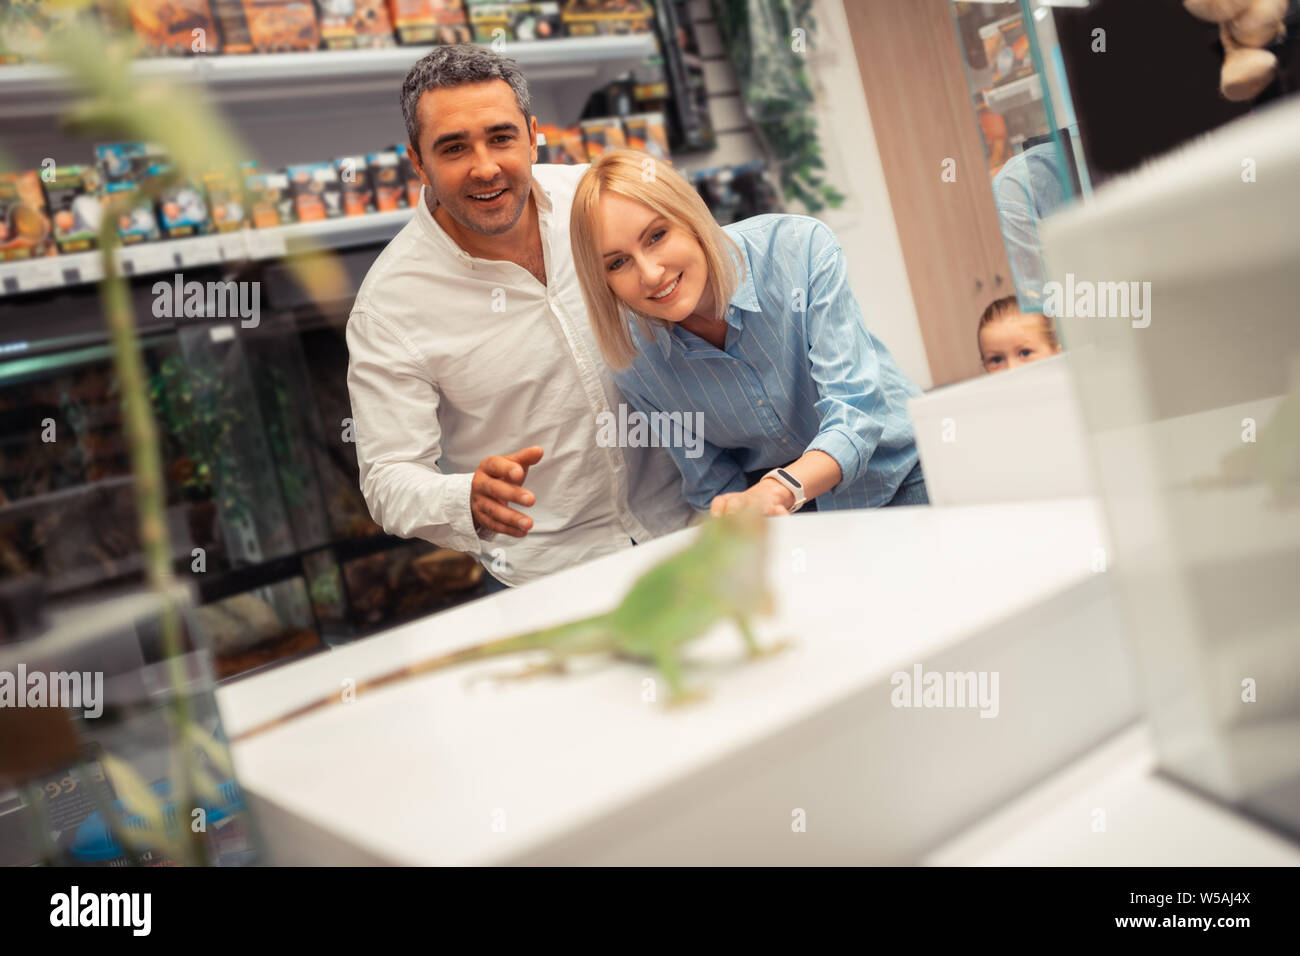 Husband and wife looking at iguana while visiting pet shop Stock Photo